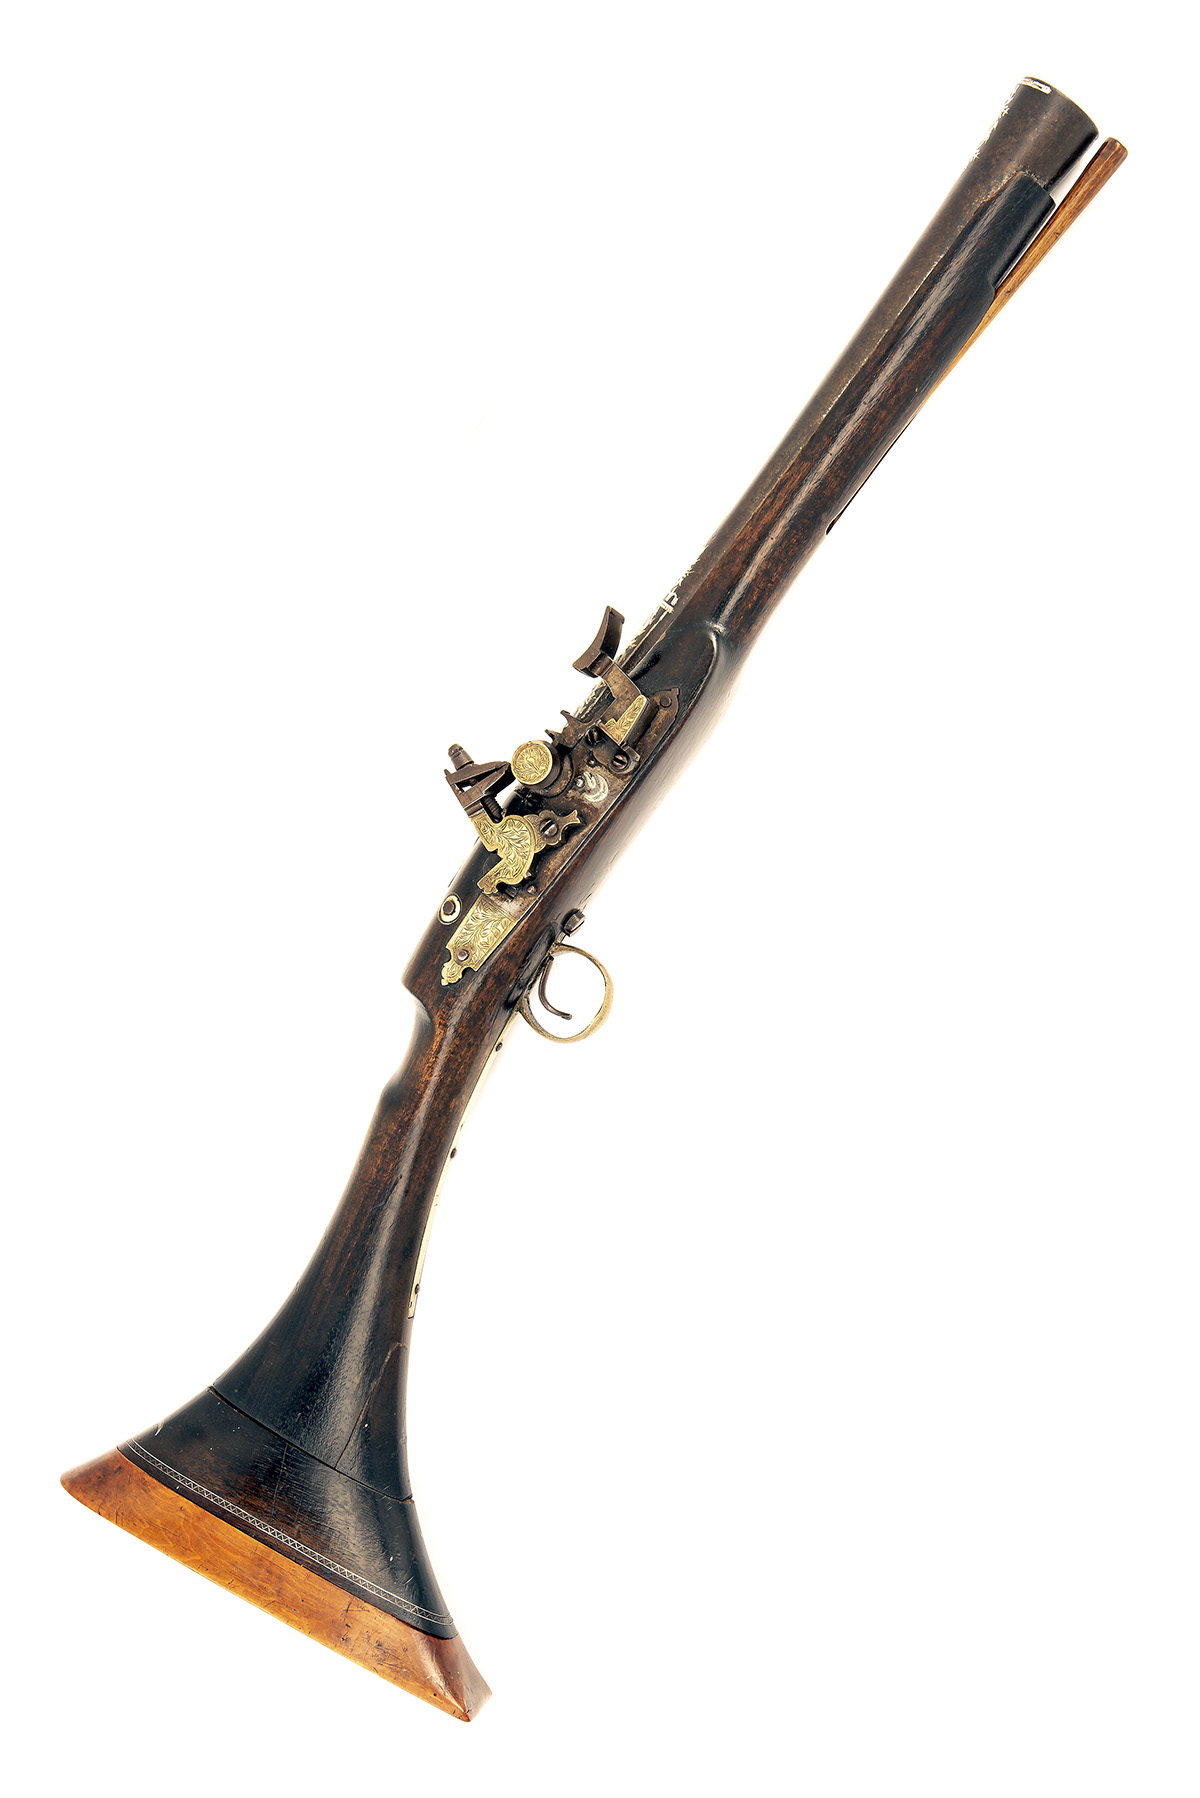 A 20-BORE SNAPHAUNCE BLUNDERBUSS or BREAST-PISTOL, UNSIGNED, no visible serial number, North African